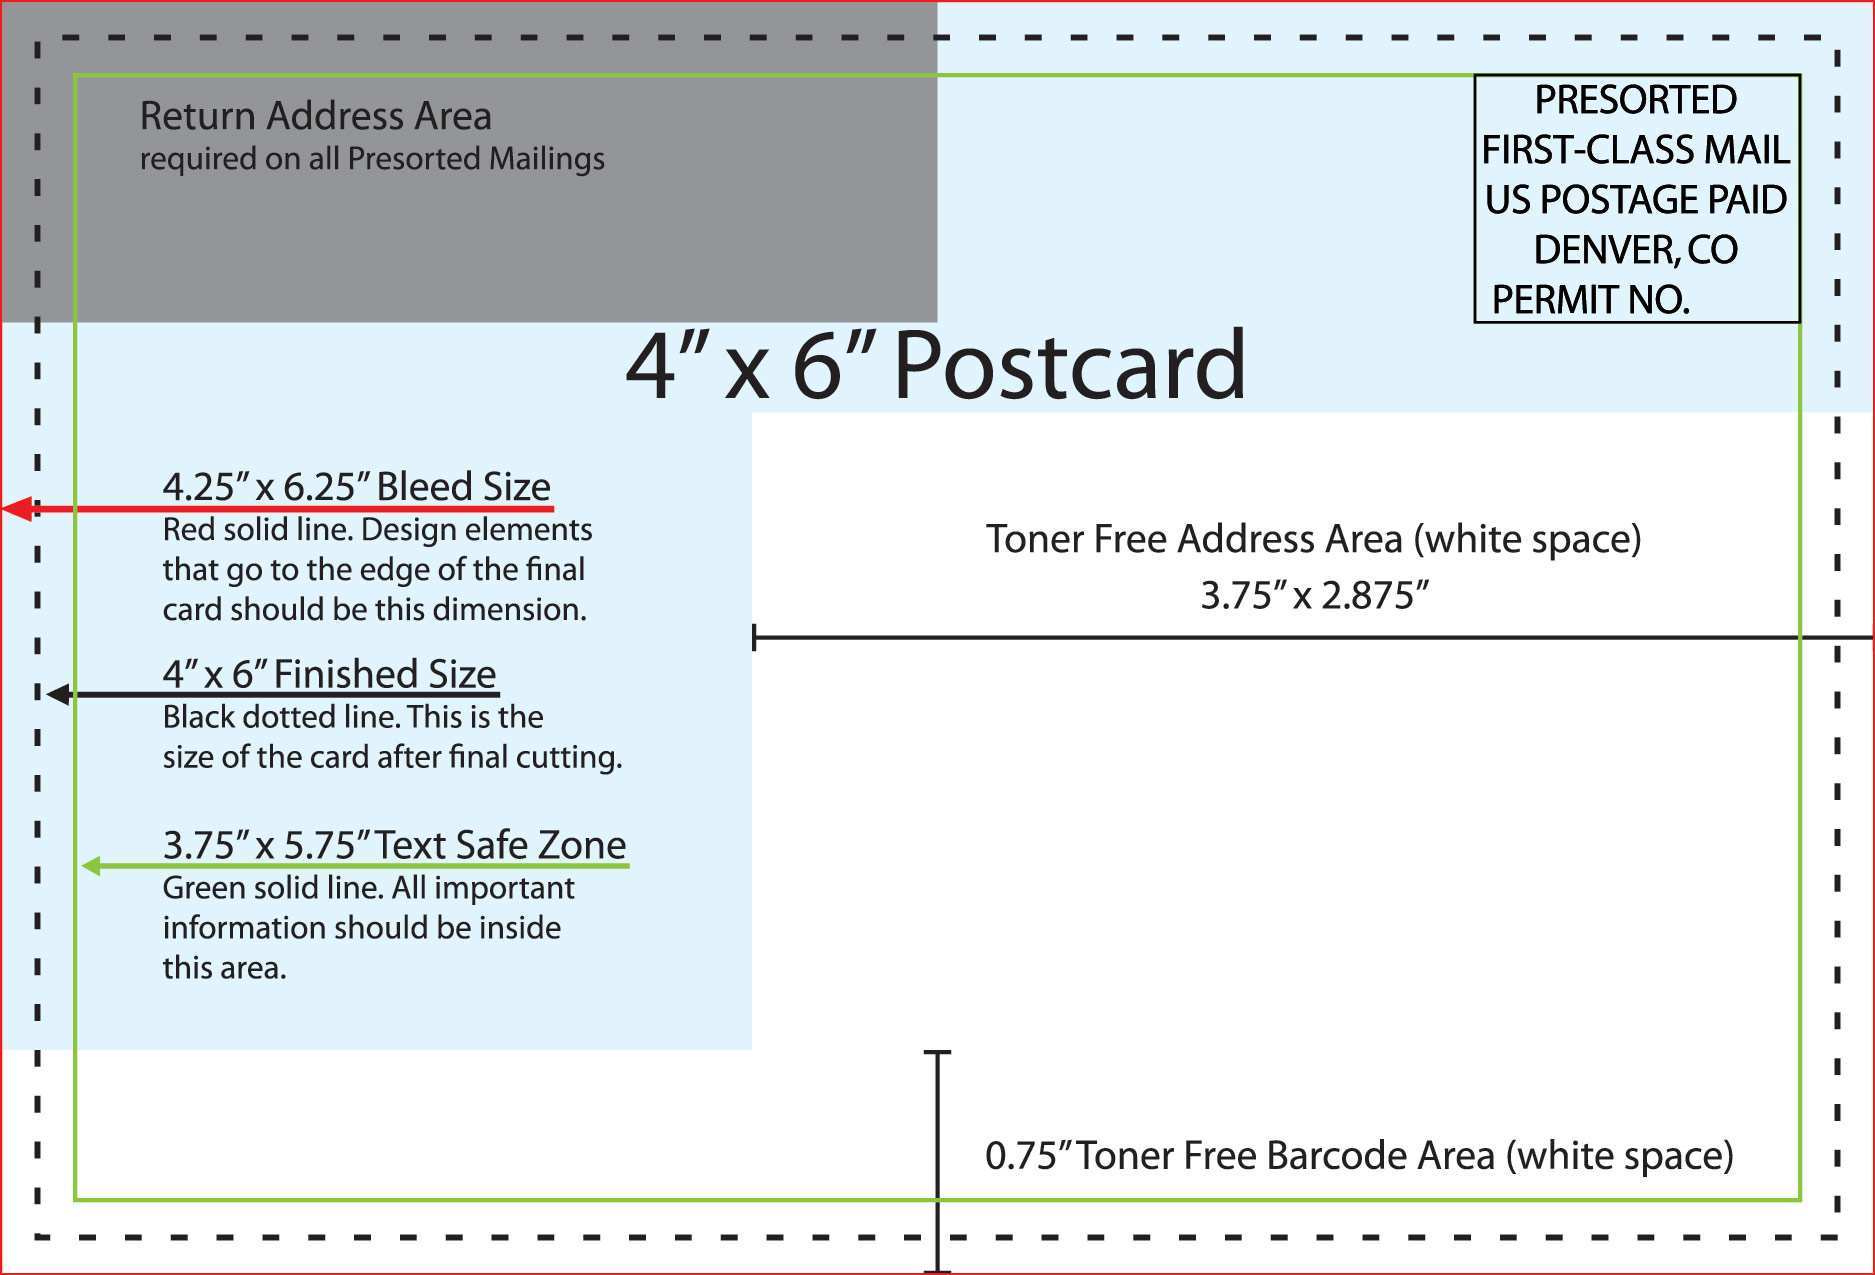 Usps Template For Postcards